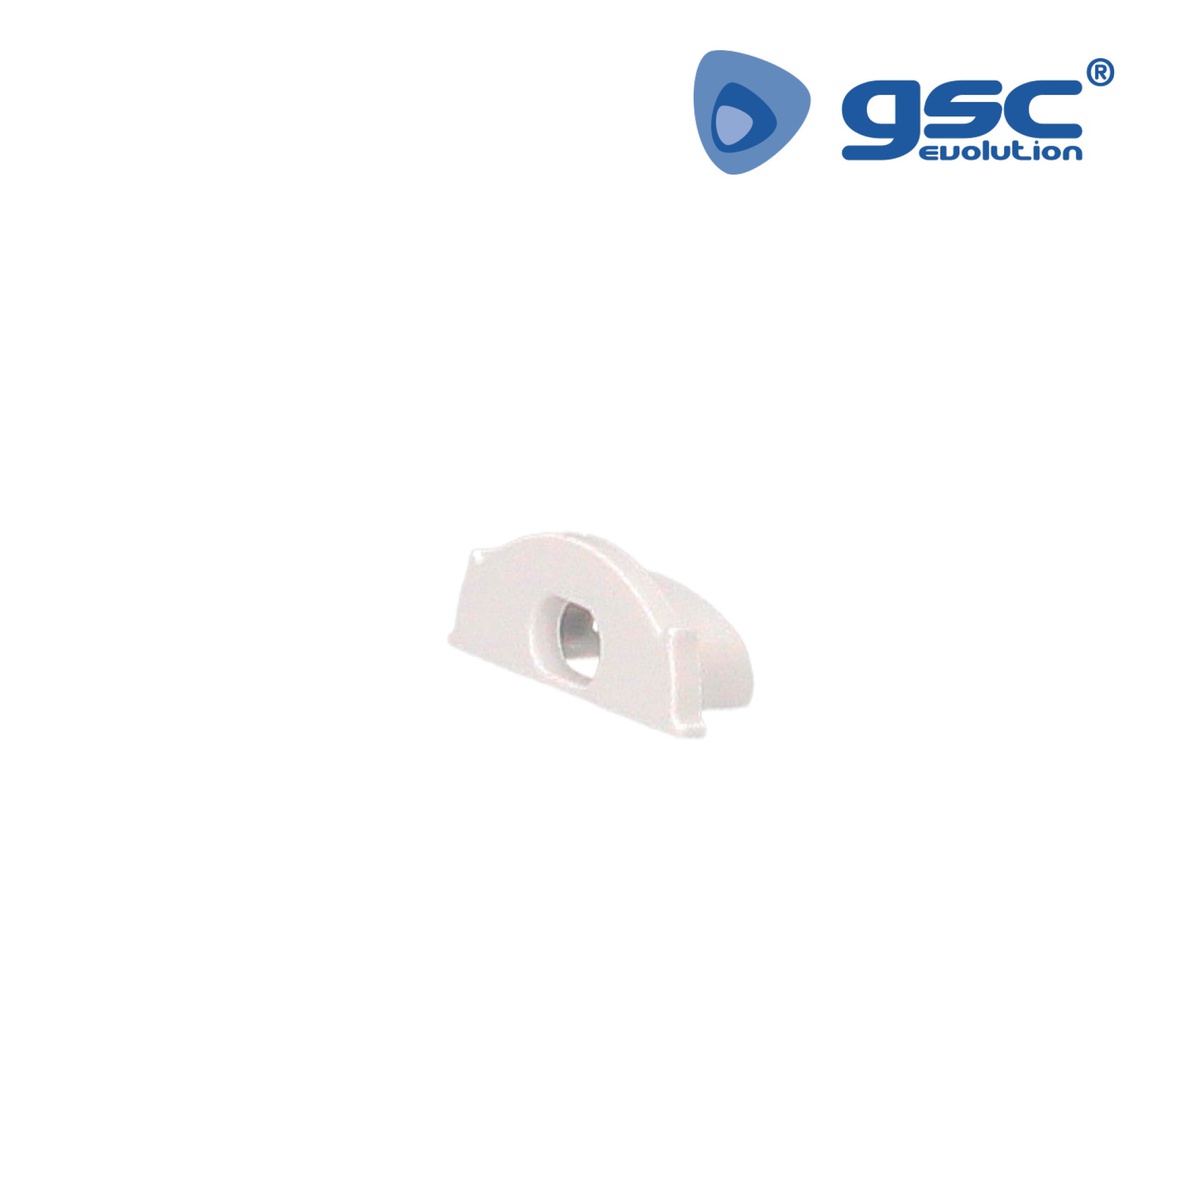 Spare end cap with hole for aluminum profile 204025001